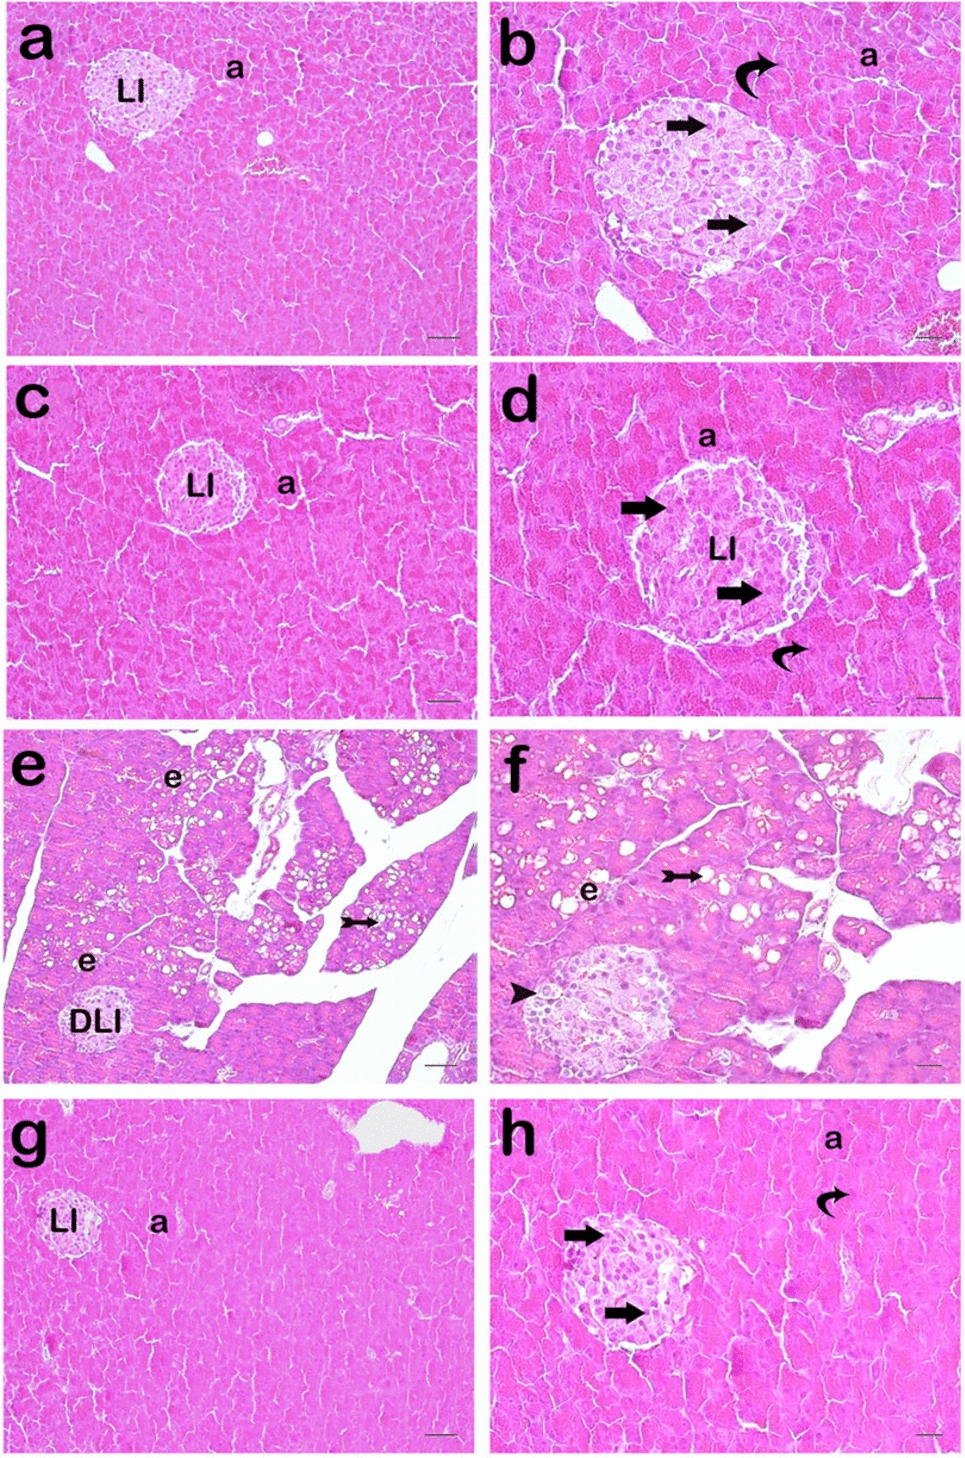 The impact of apelin-13 on cisplatin-induced endocrine pancreas damage in rats: an in vivo study